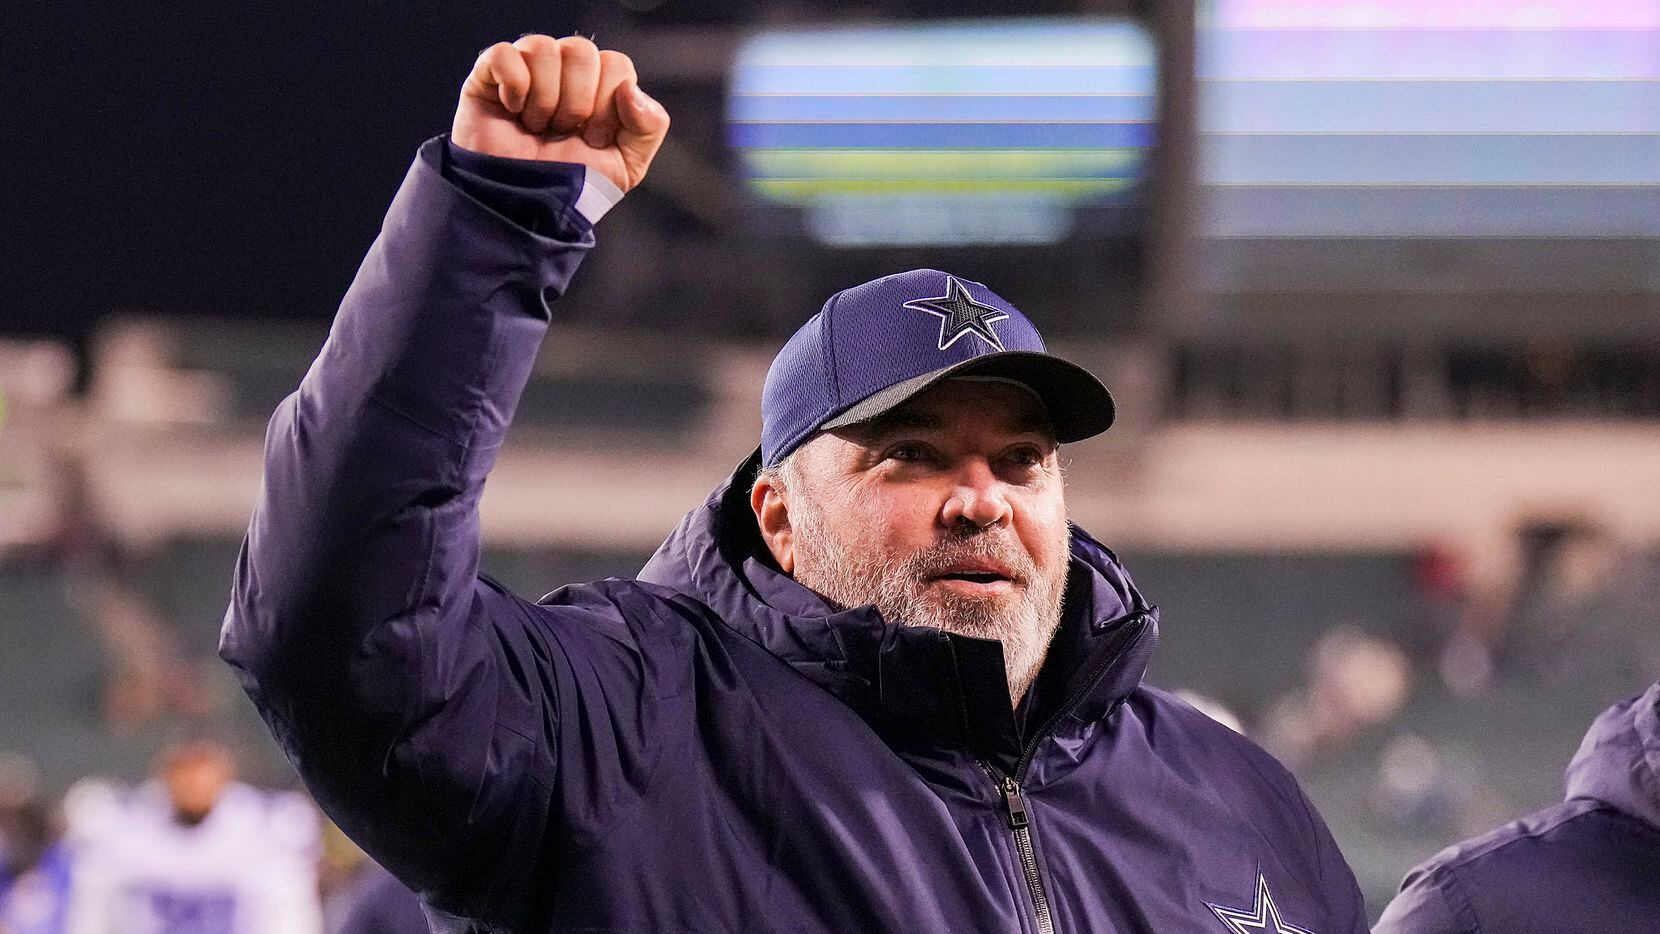 Dallas Cowboys head coach Mike McCarthy pumps his fist to the crowd as he leaves the field after a 51-26 victory over the Philadelphia Eagles in an NFL football game at Lincoln Financial Field on Saturday, Jan. 8, 2022.